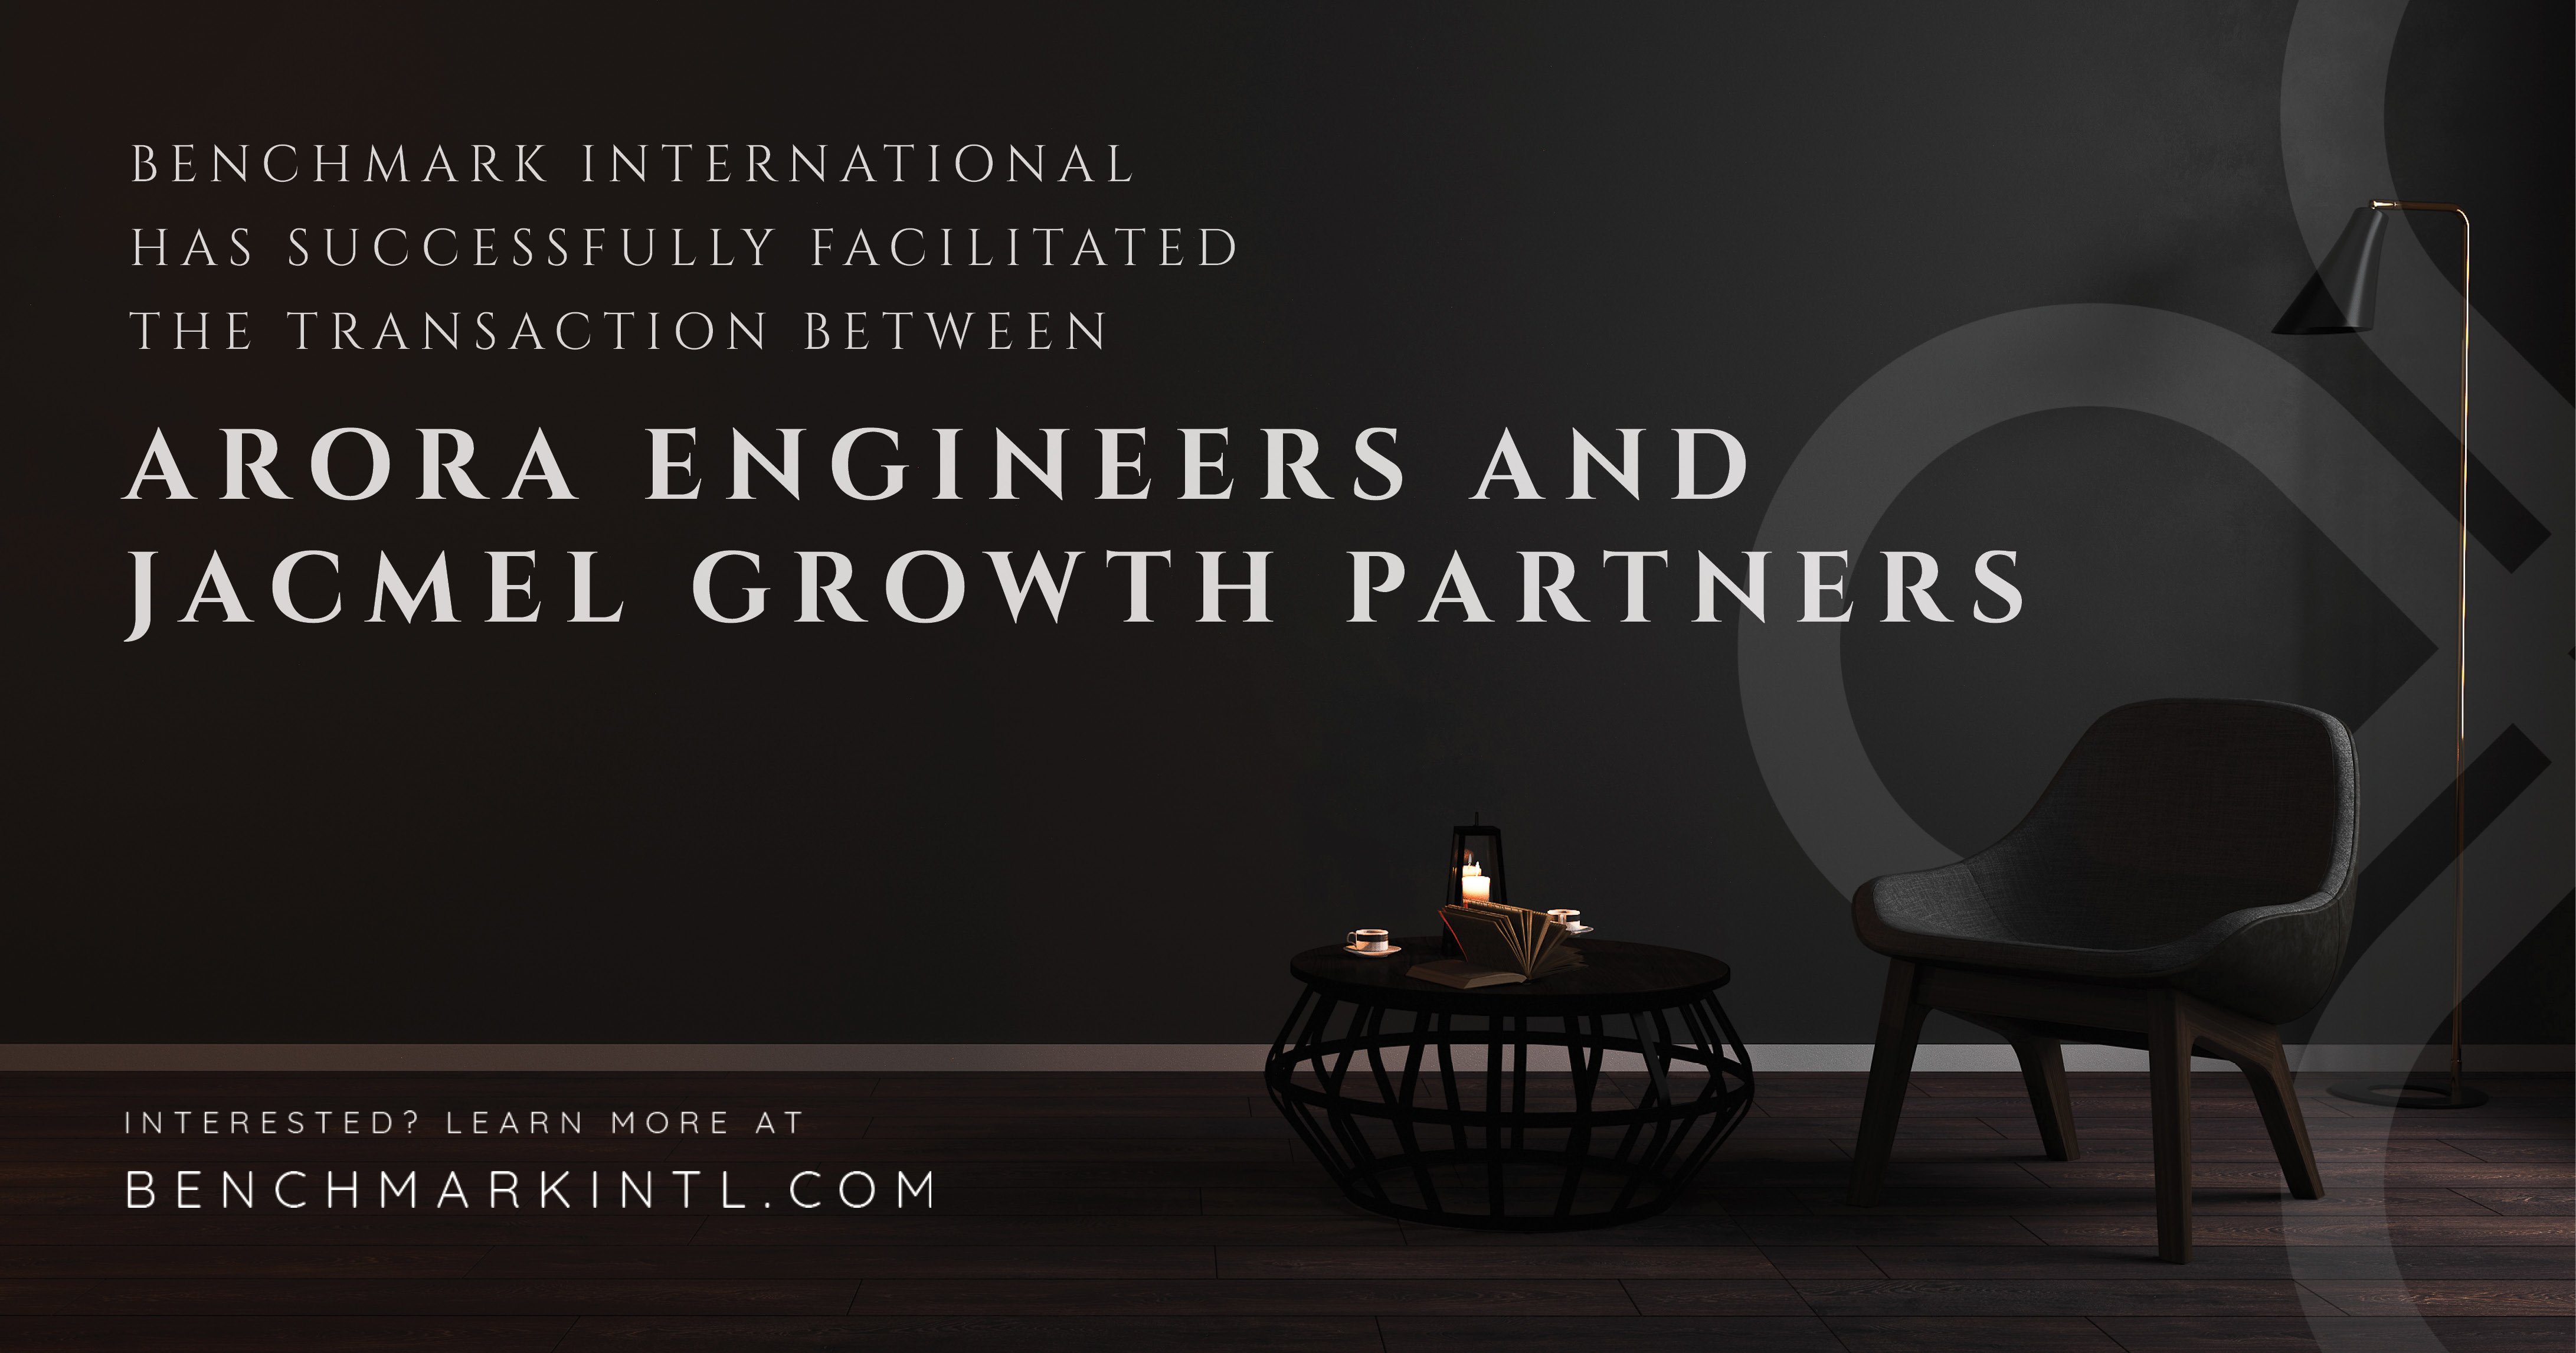 Benchmark International Successfully Facilitated The Transaction Between Arora Engineers And Jacmel Growth Partners